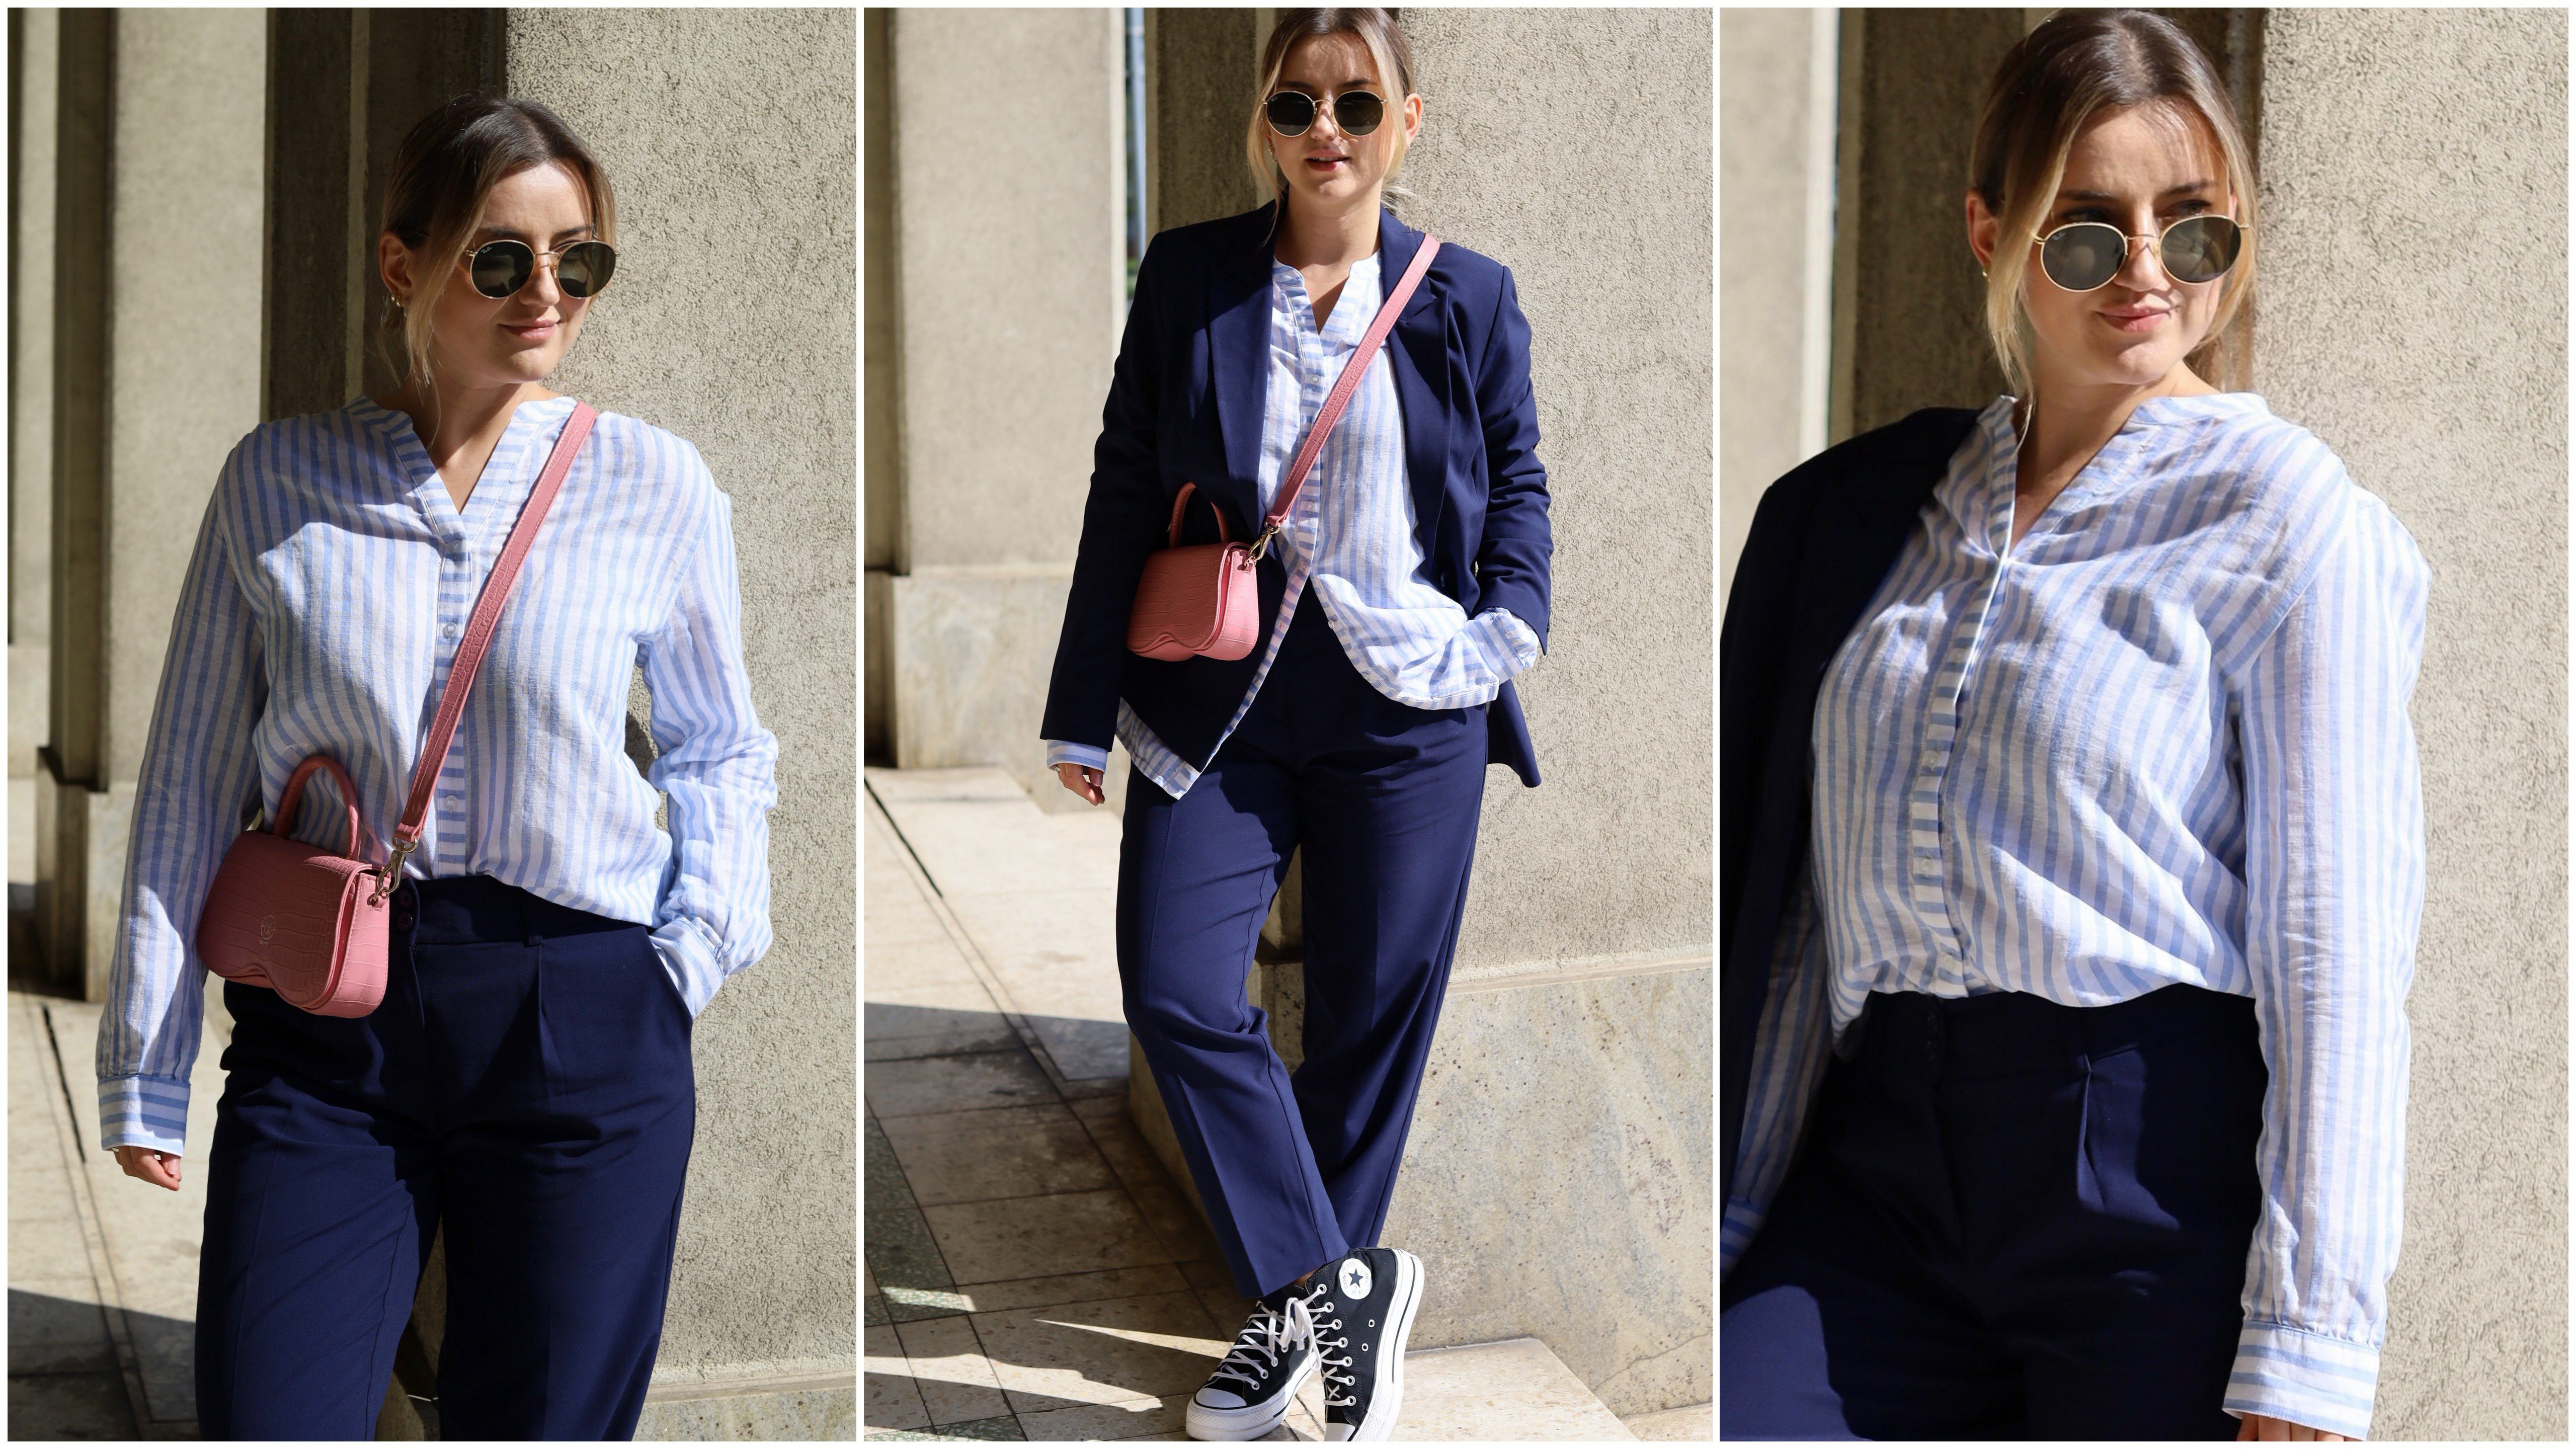 Paulina likes to mix styles and loves the combination of the striped blouse with the elegant dark blue suit and sneakers.